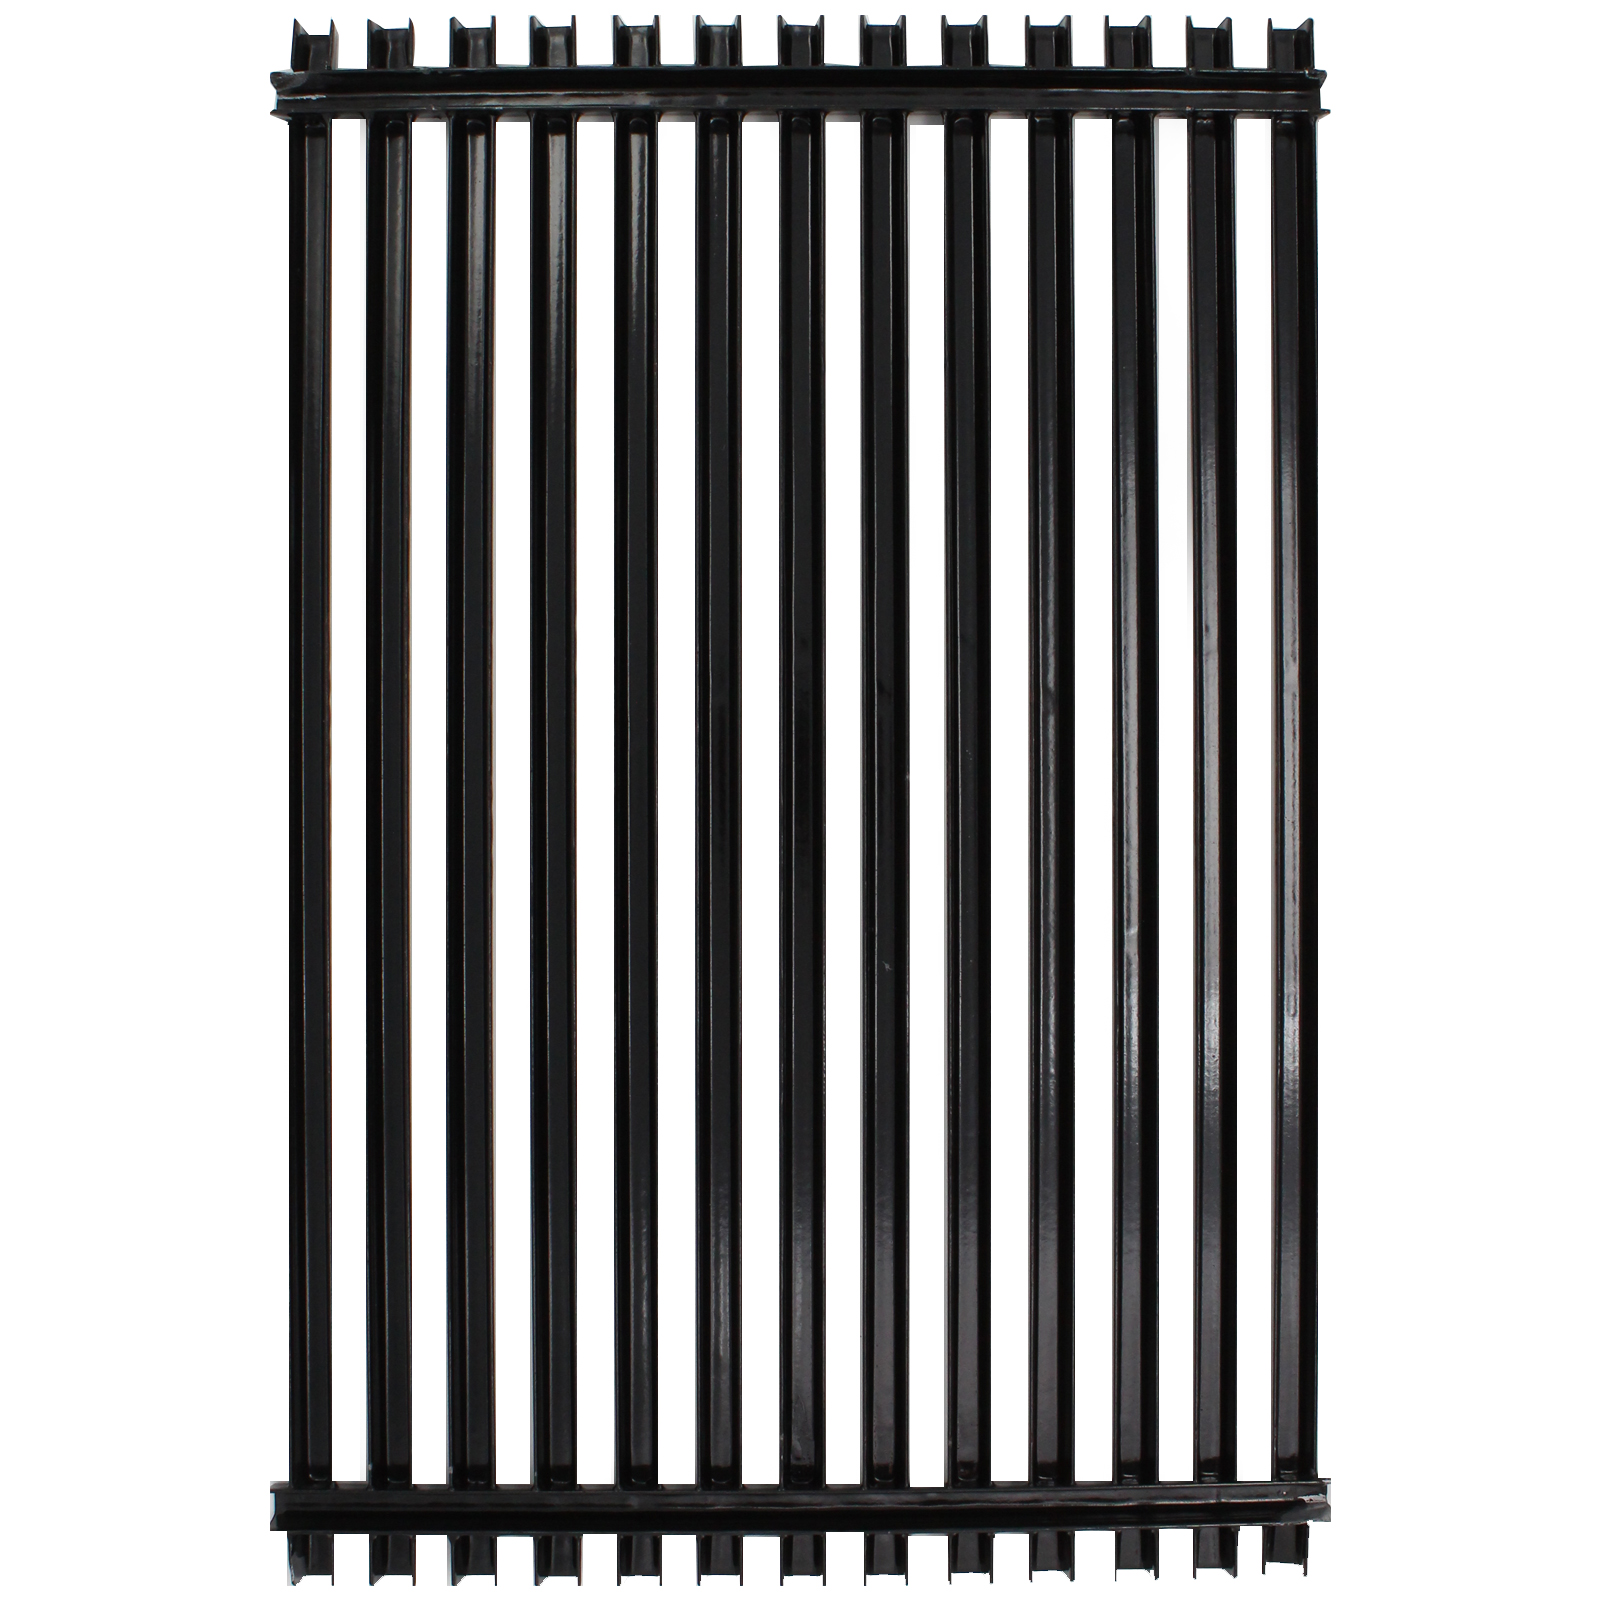 BBQ Grill Cooking Grates Replacement Parts for Kalamazoo Pedestal - Compatible Barbeque Porcelain Coated Steel Grid 17 3/4" - image 2 of 4